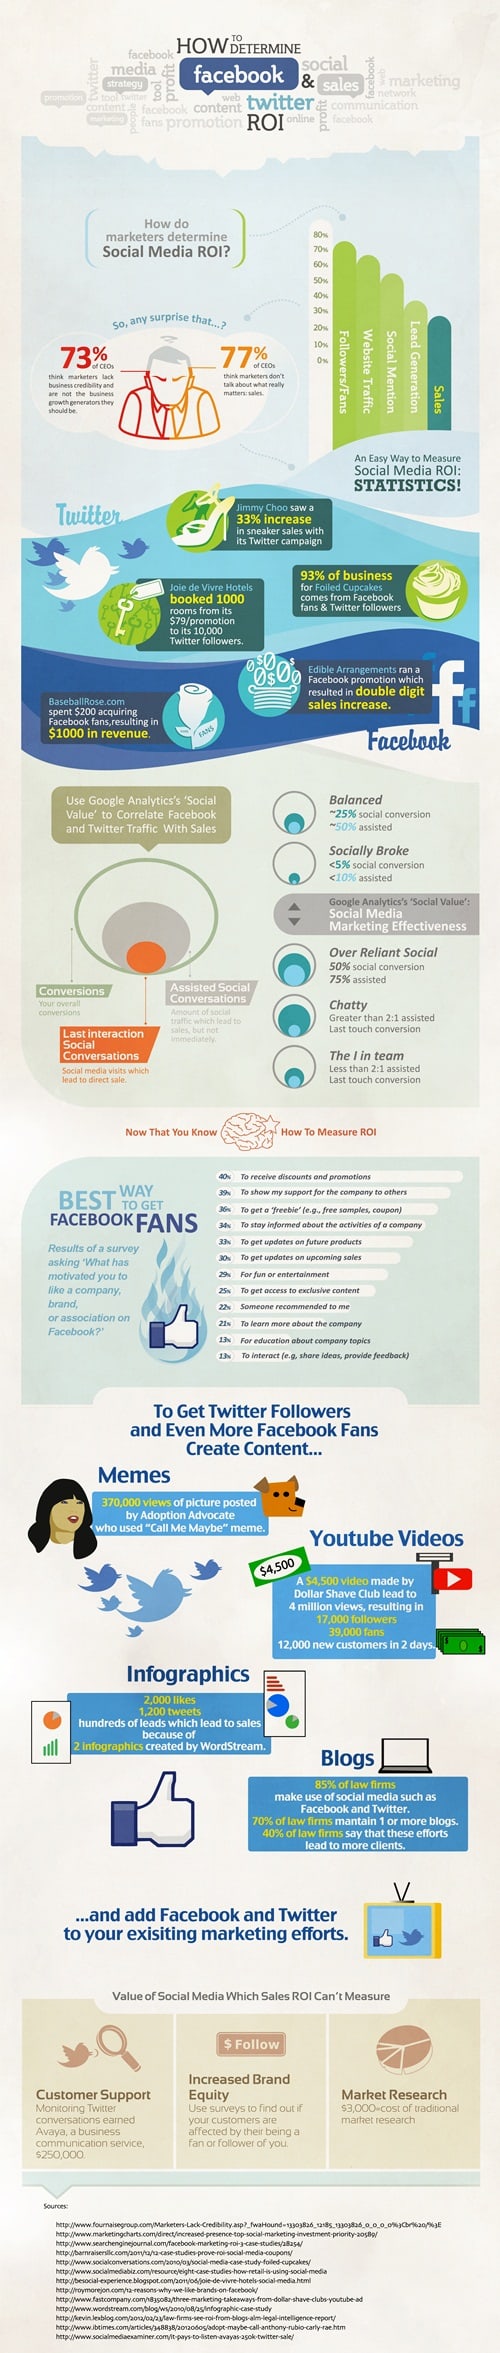 Infographic to determine facebook and twitter ads ROI